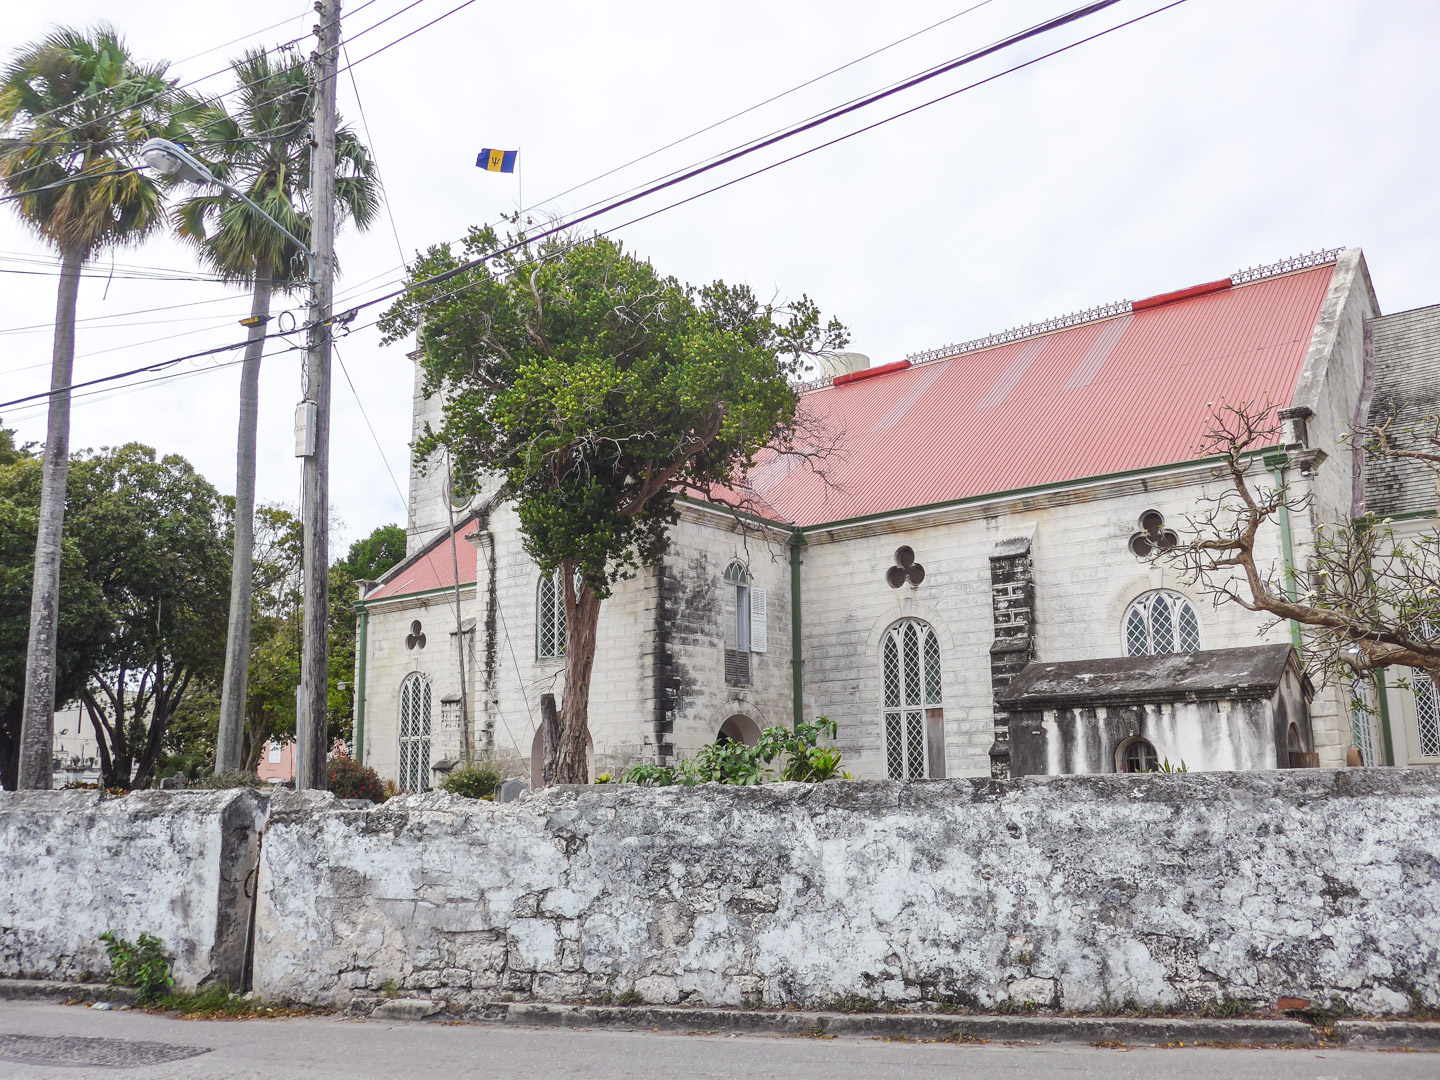 St Michael's Cathedral in Bridgetown Barbados